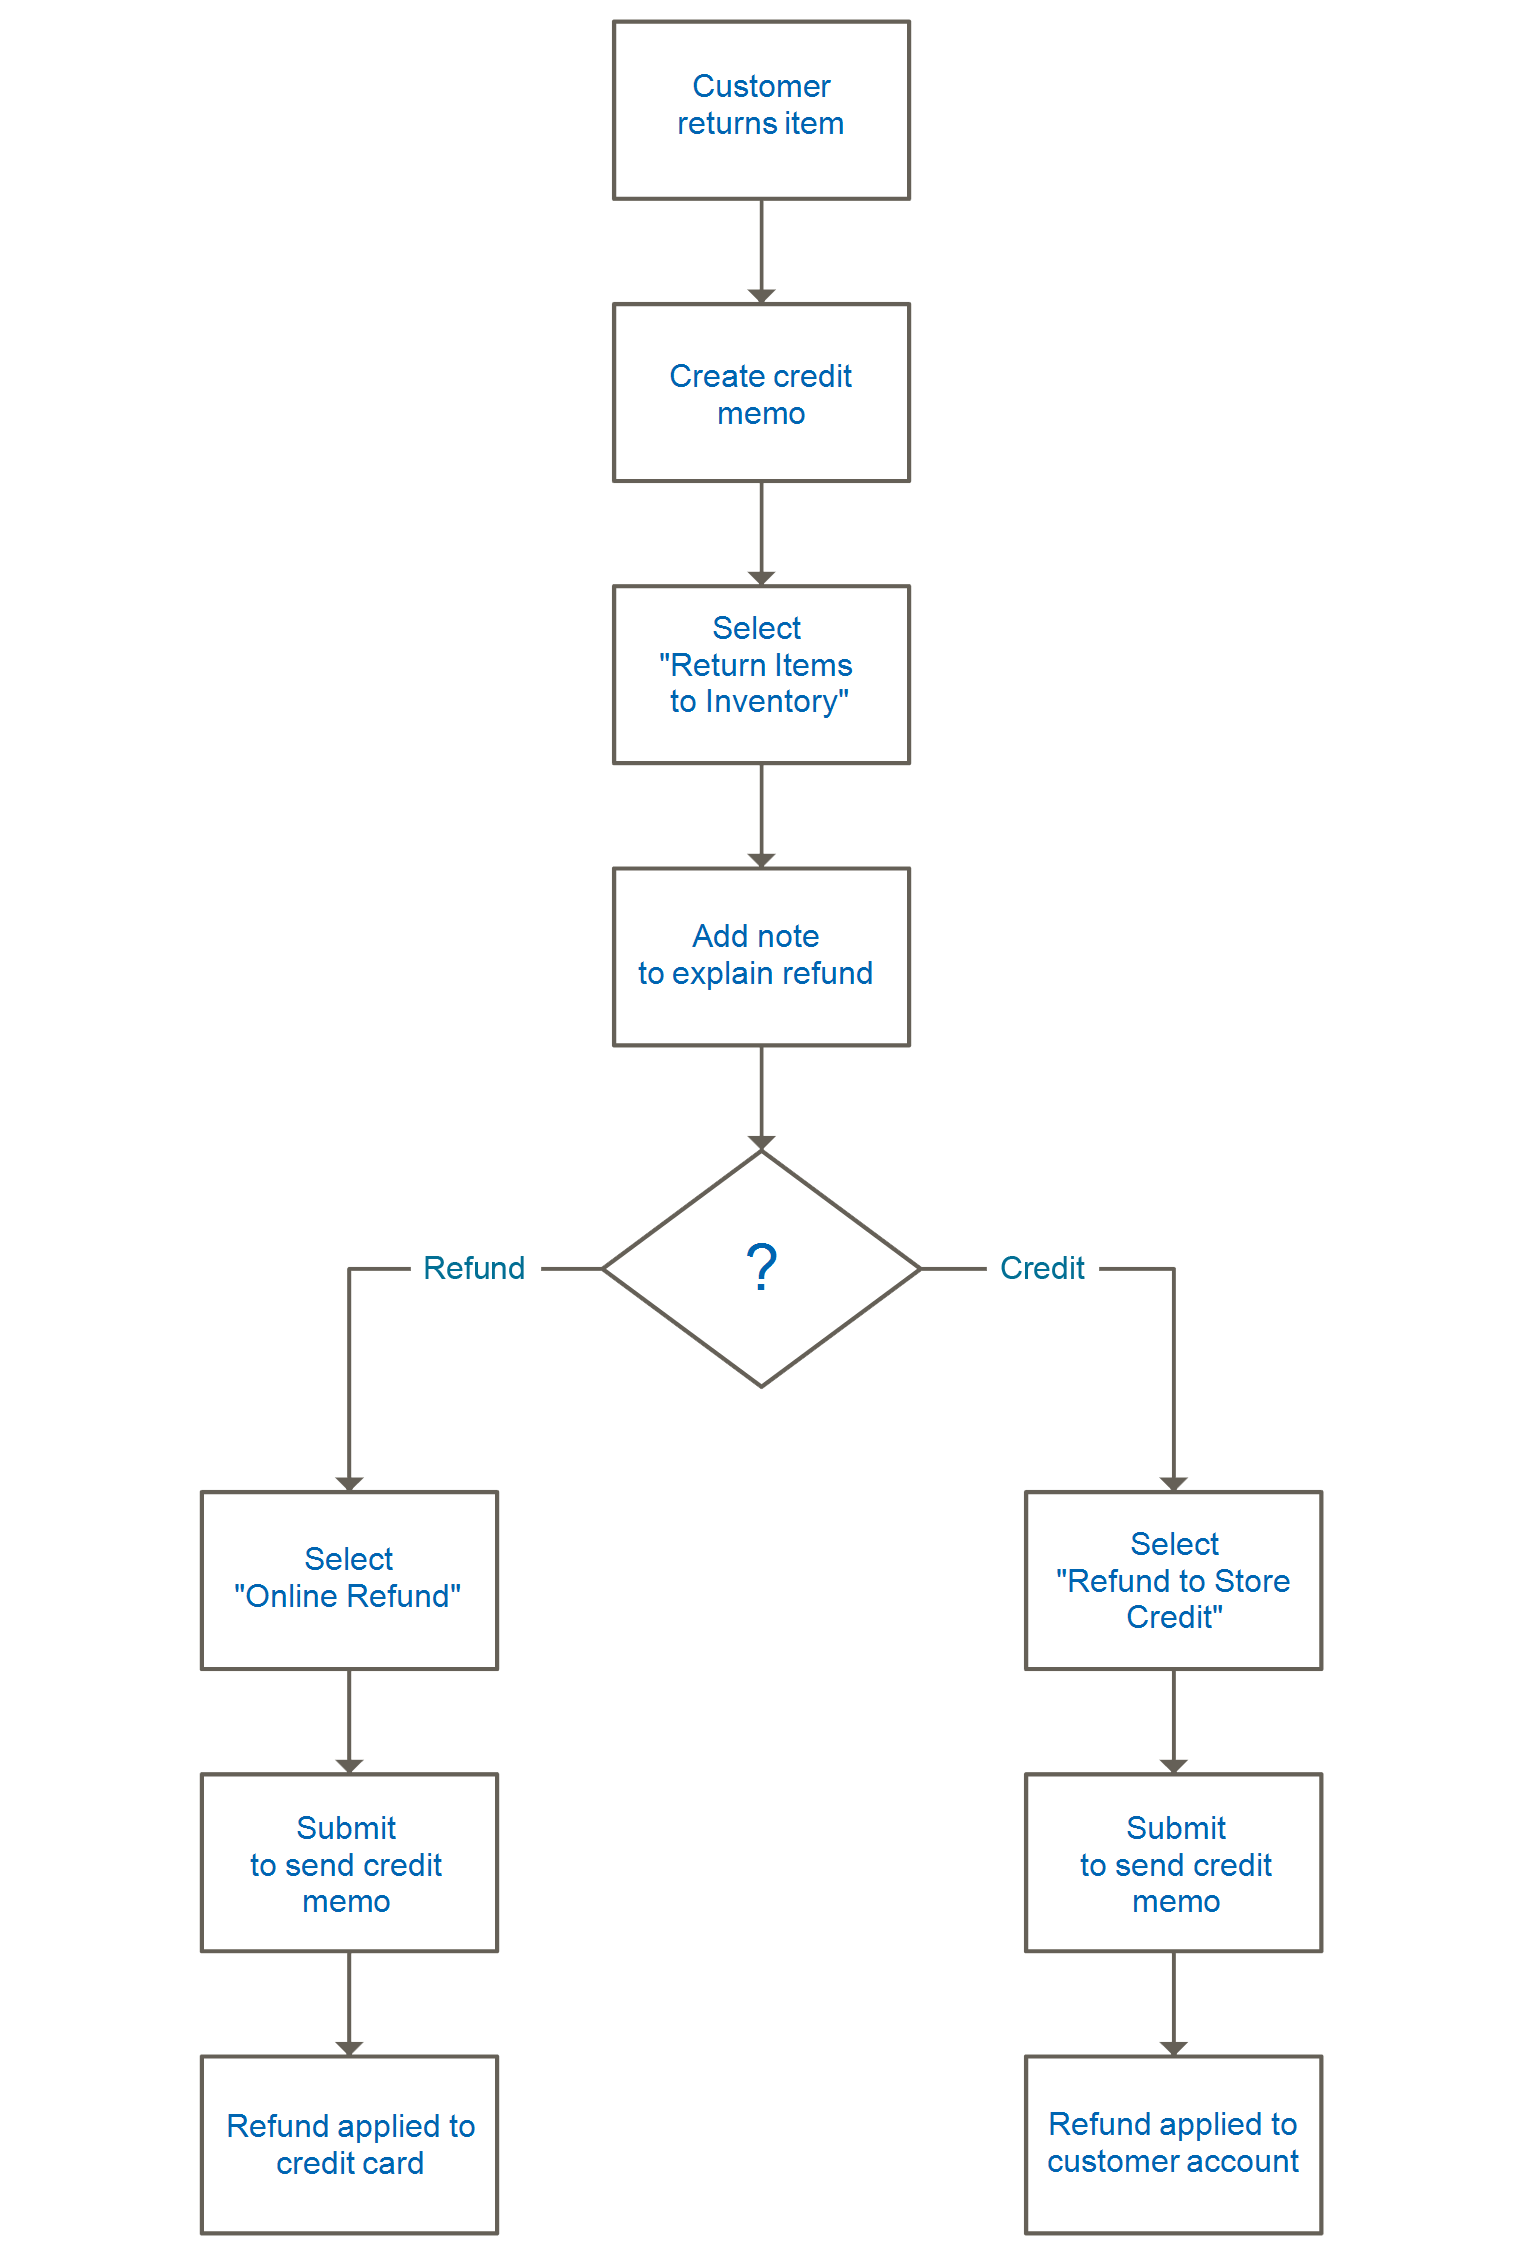 Product Return Workflow